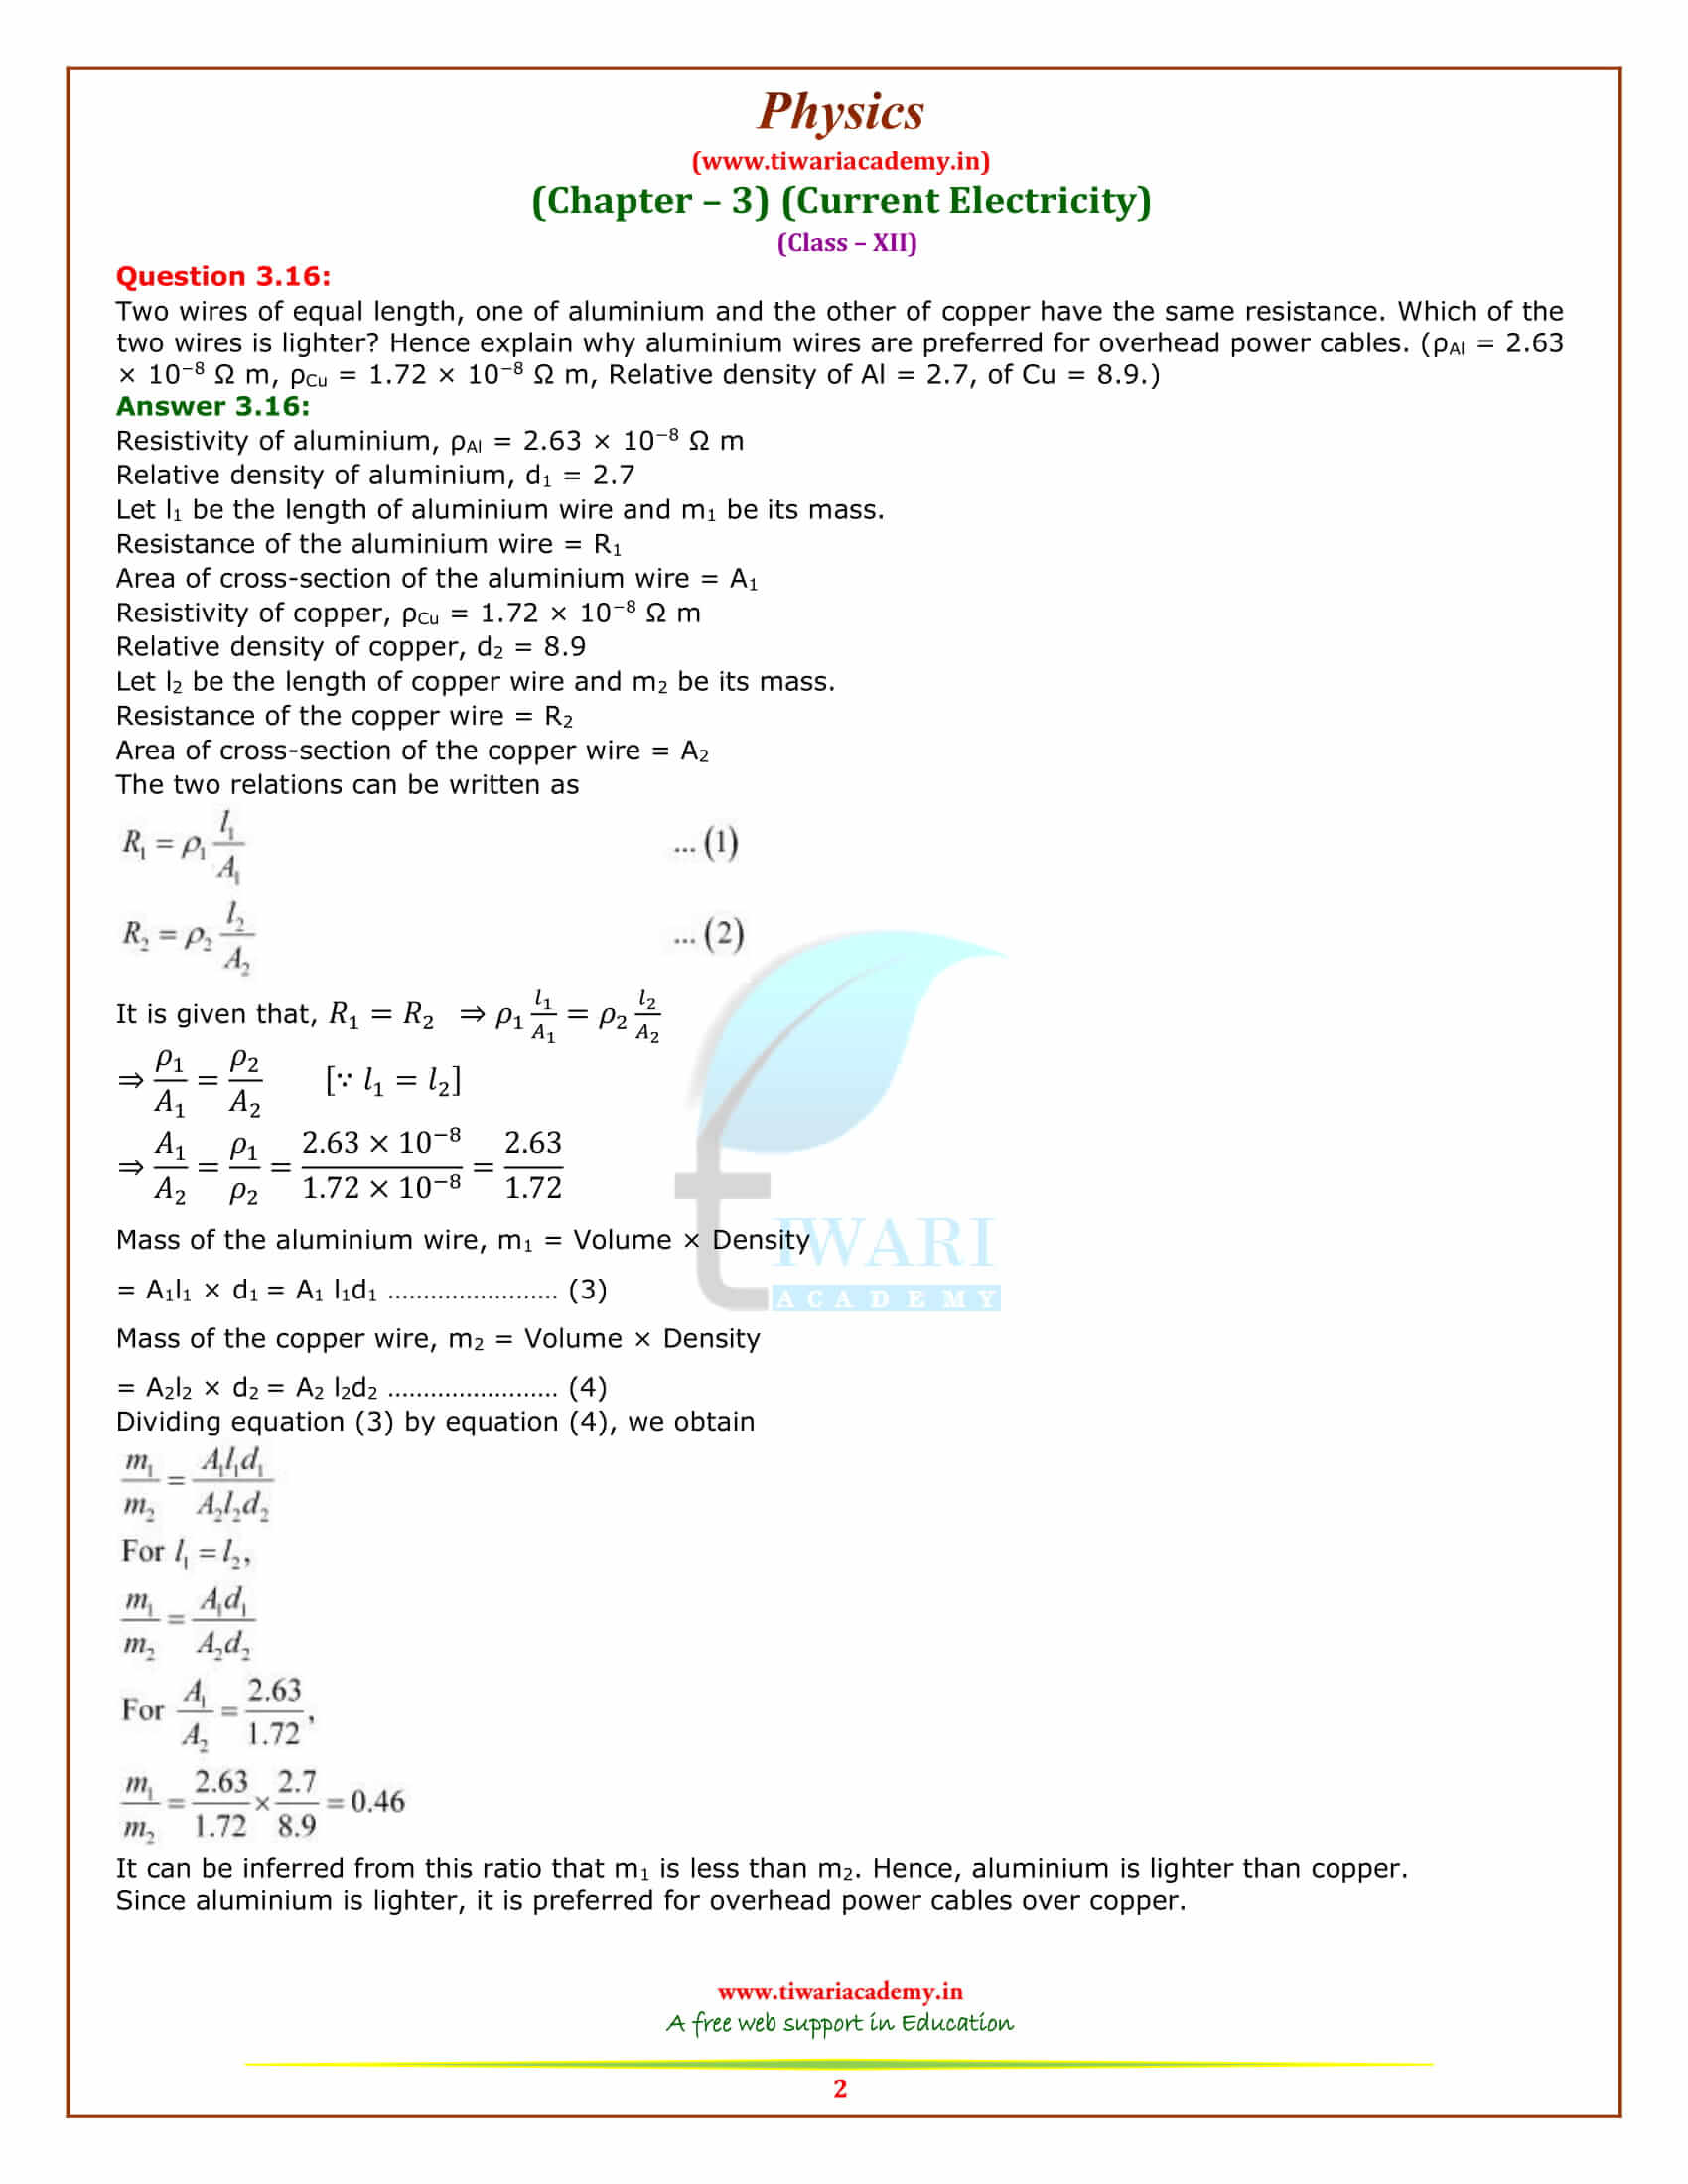 NCERT Solutions for Class 12 Physics Chapter 3 Current Electricity additional exercises in pdf